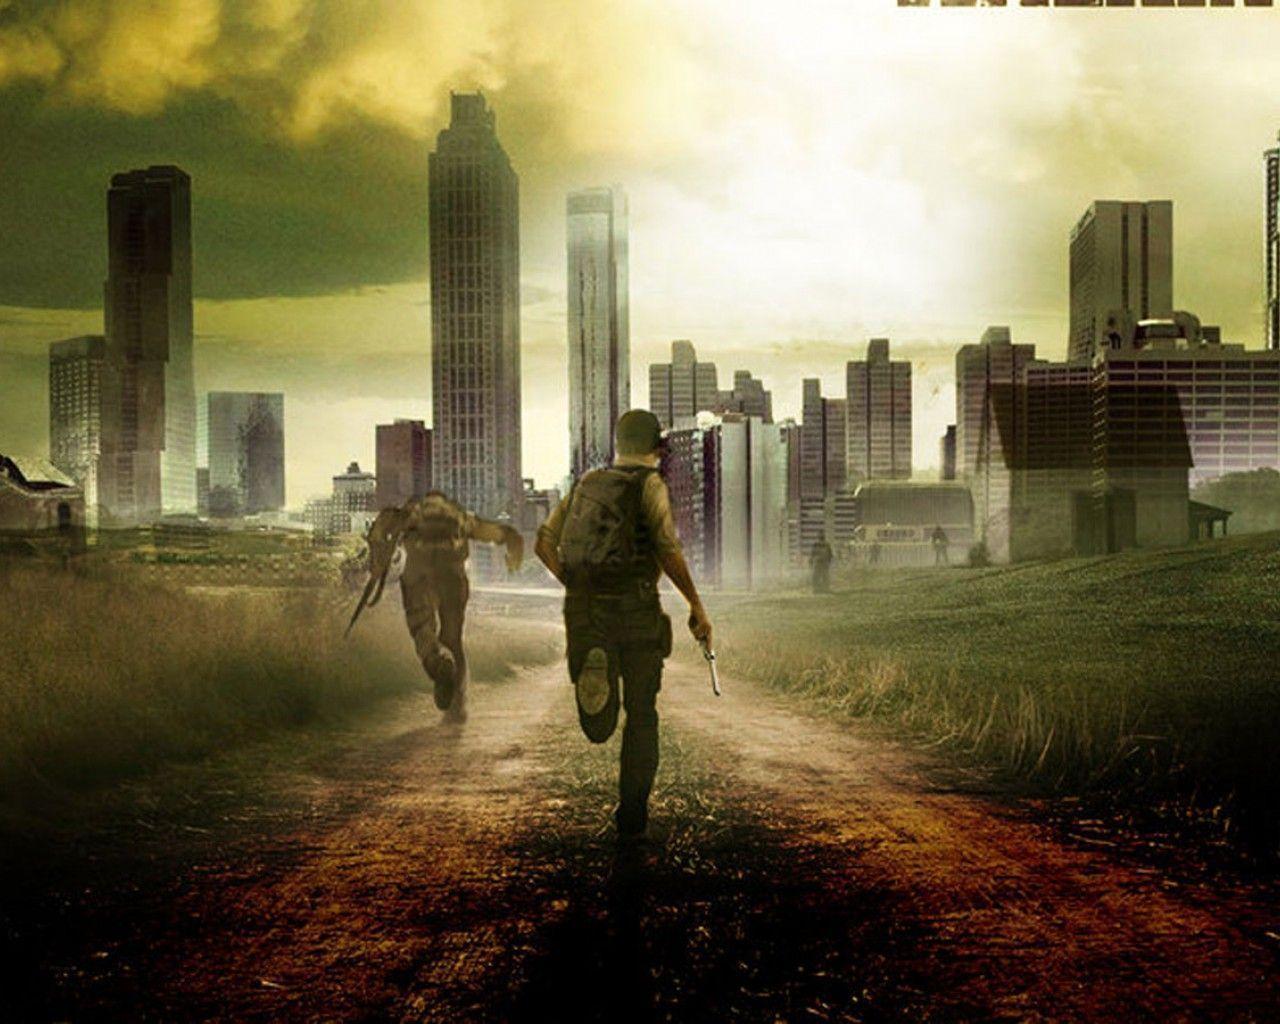 Movie The Walking Dead Wallpaper HD Game Background 1920x1200PX